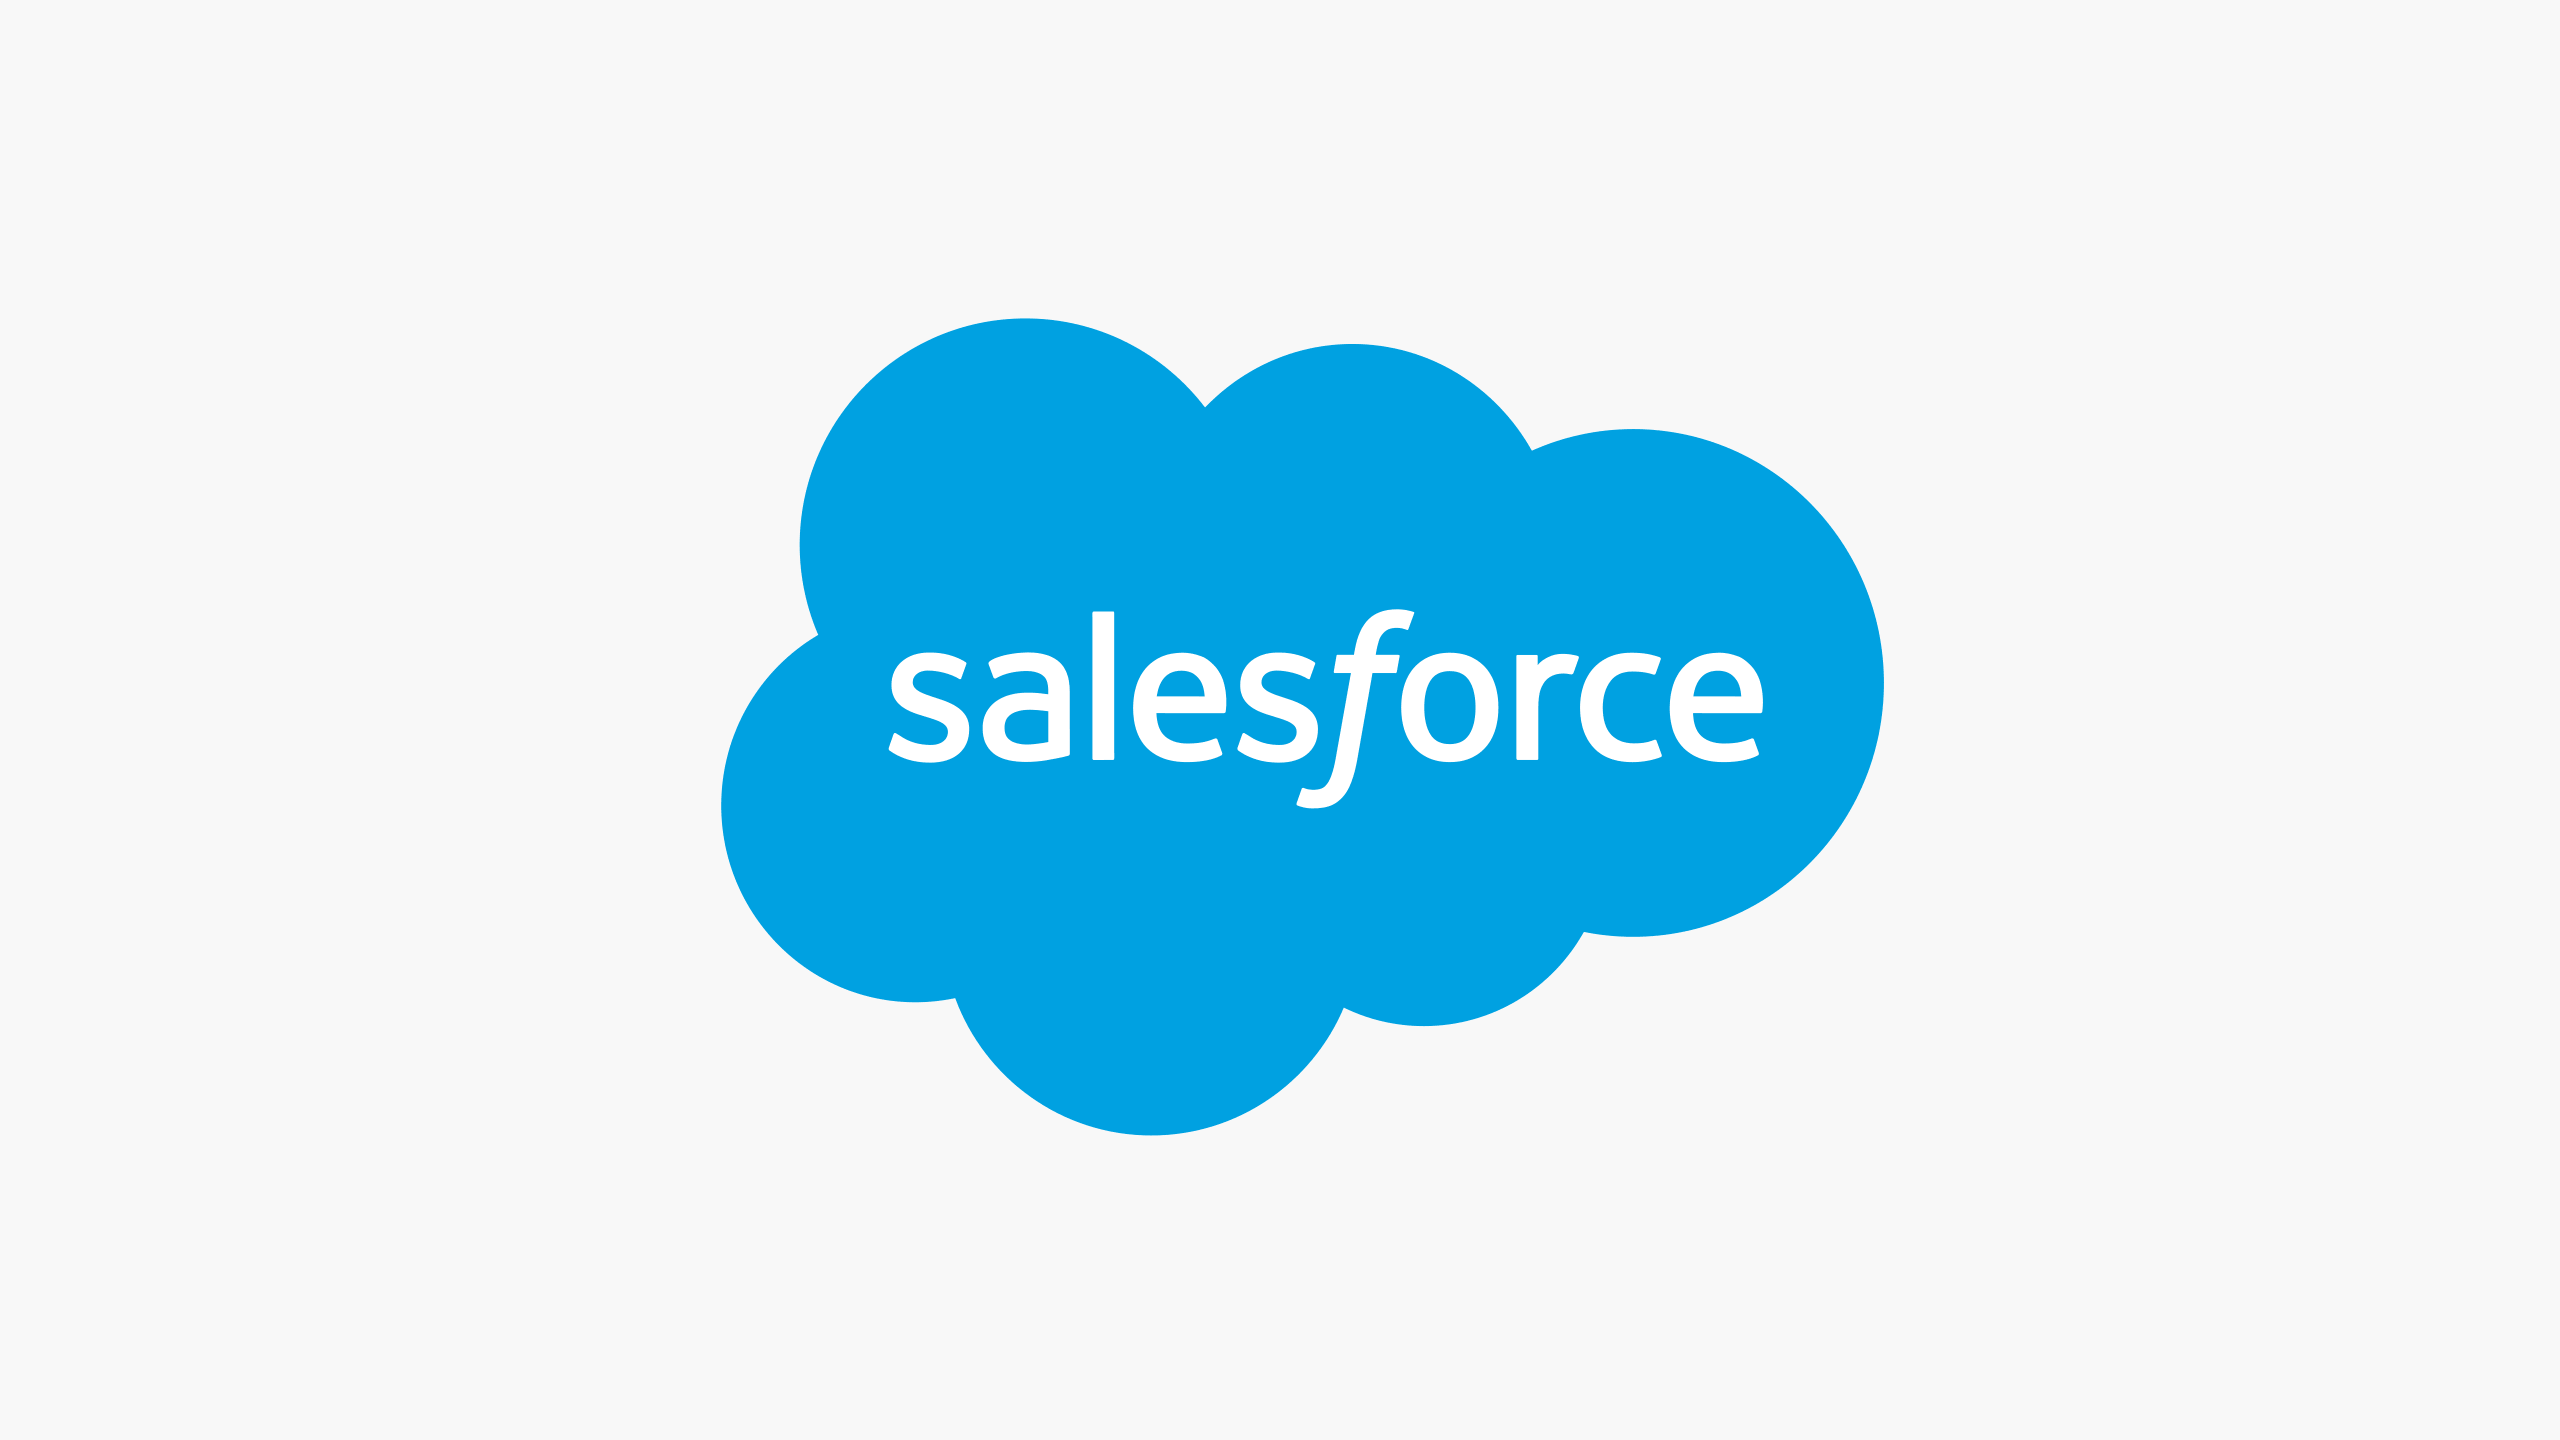 Learn how Salesforce Gained $8B in a highly competitive niche